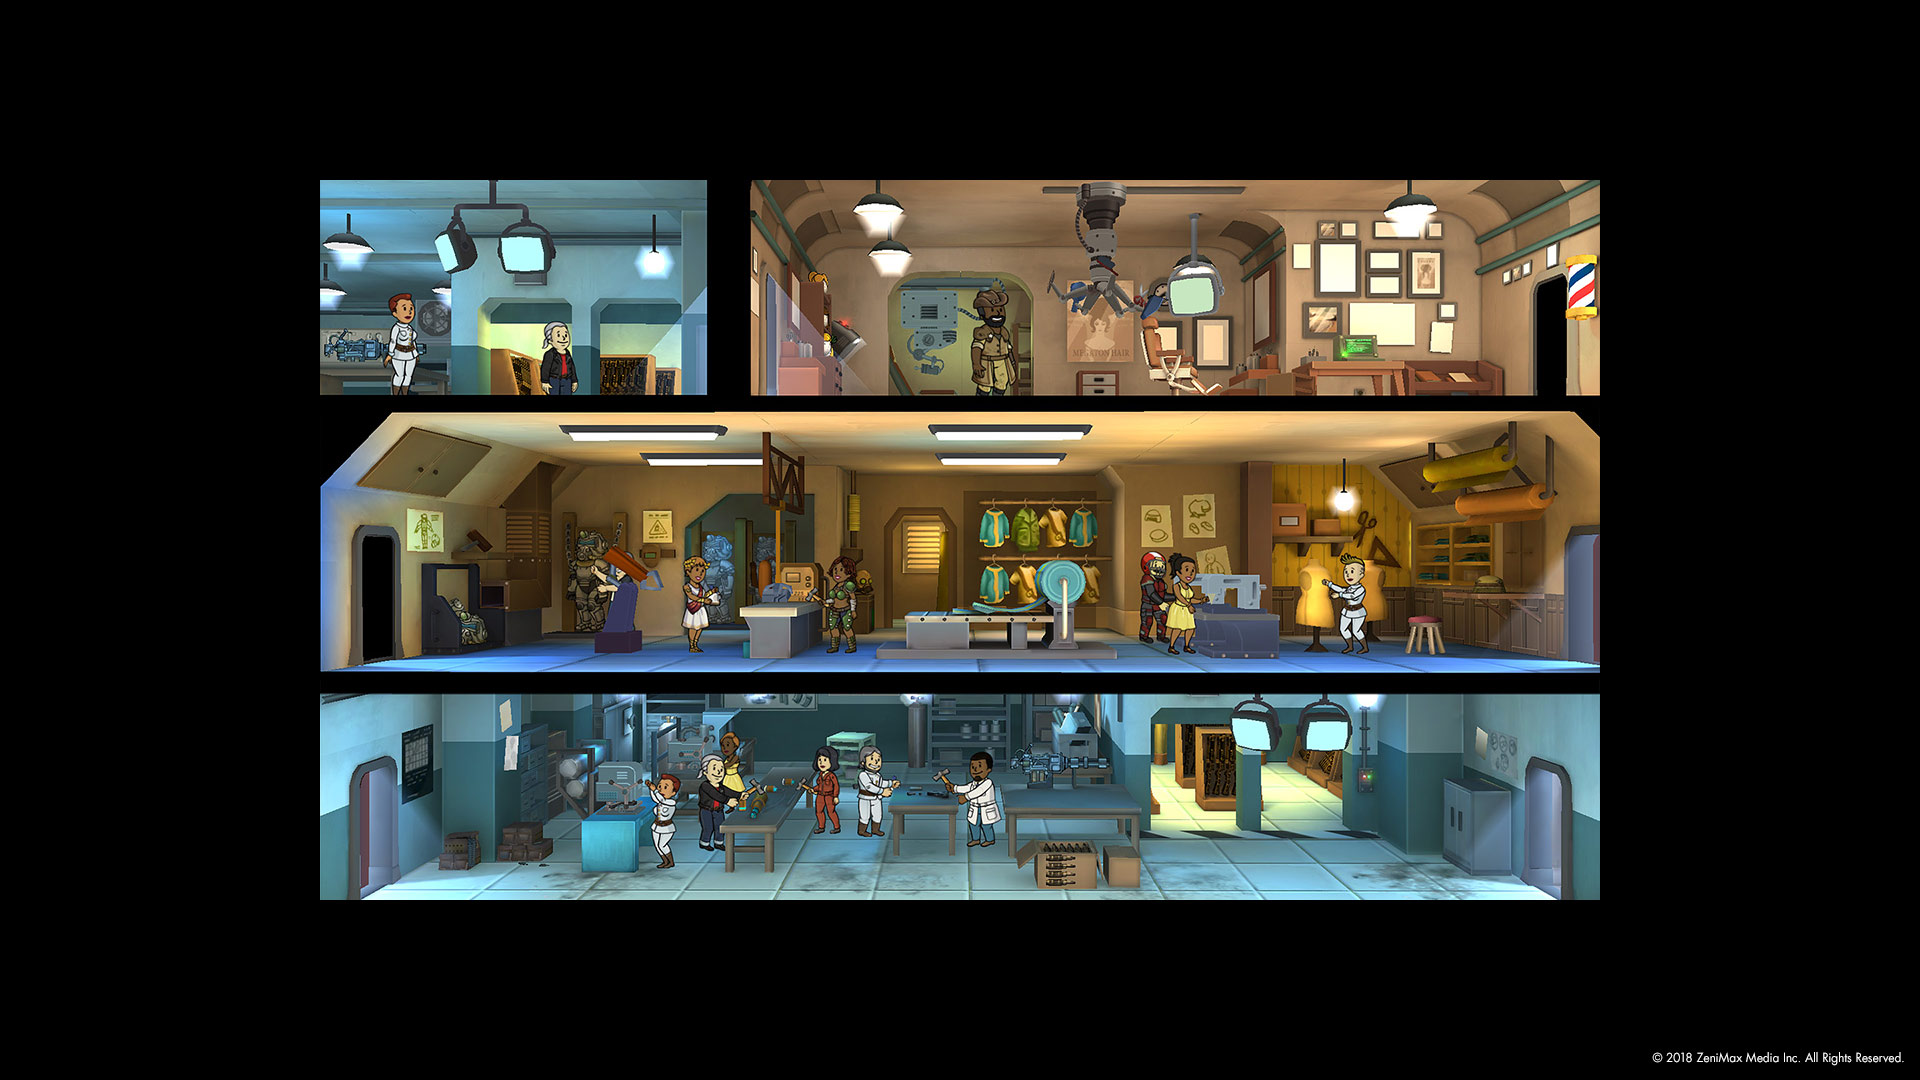 download free ps4 fallout shelter